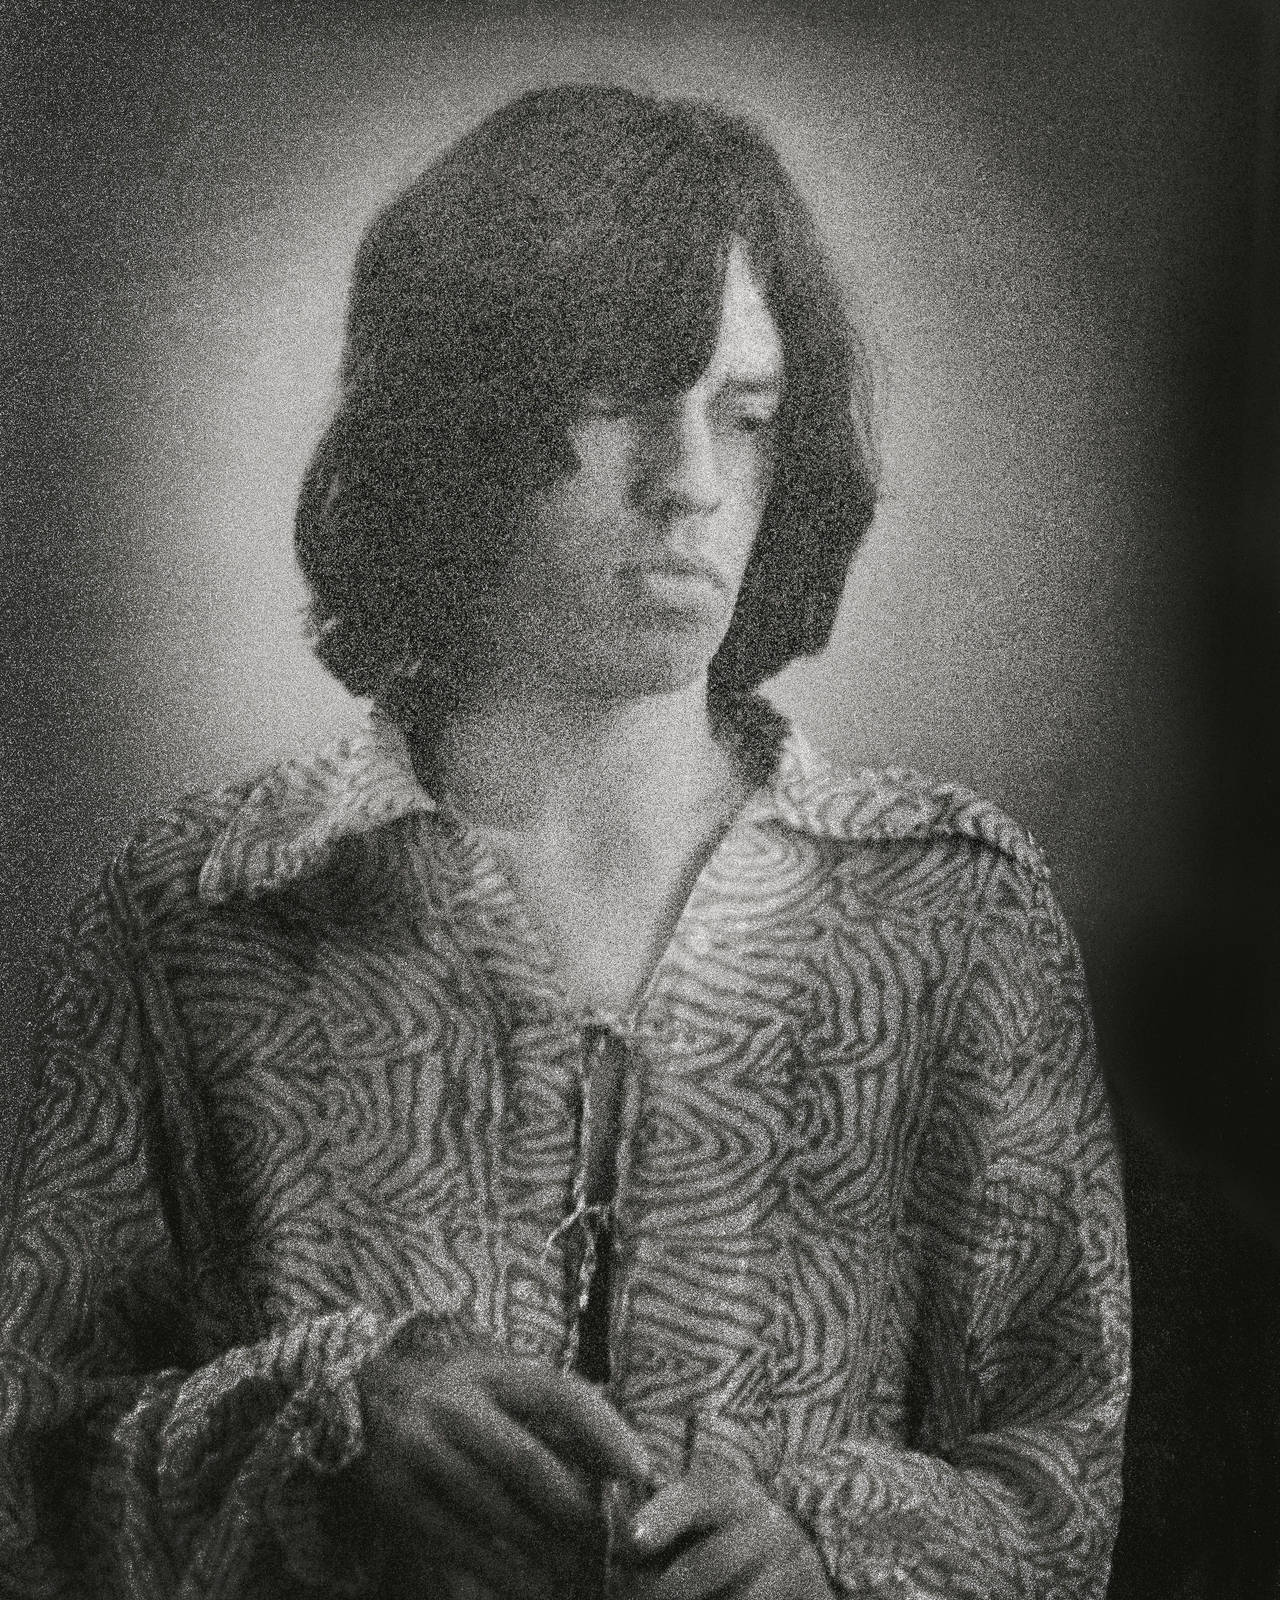 Willie Christie Black and White Photograph - Mick Jagger